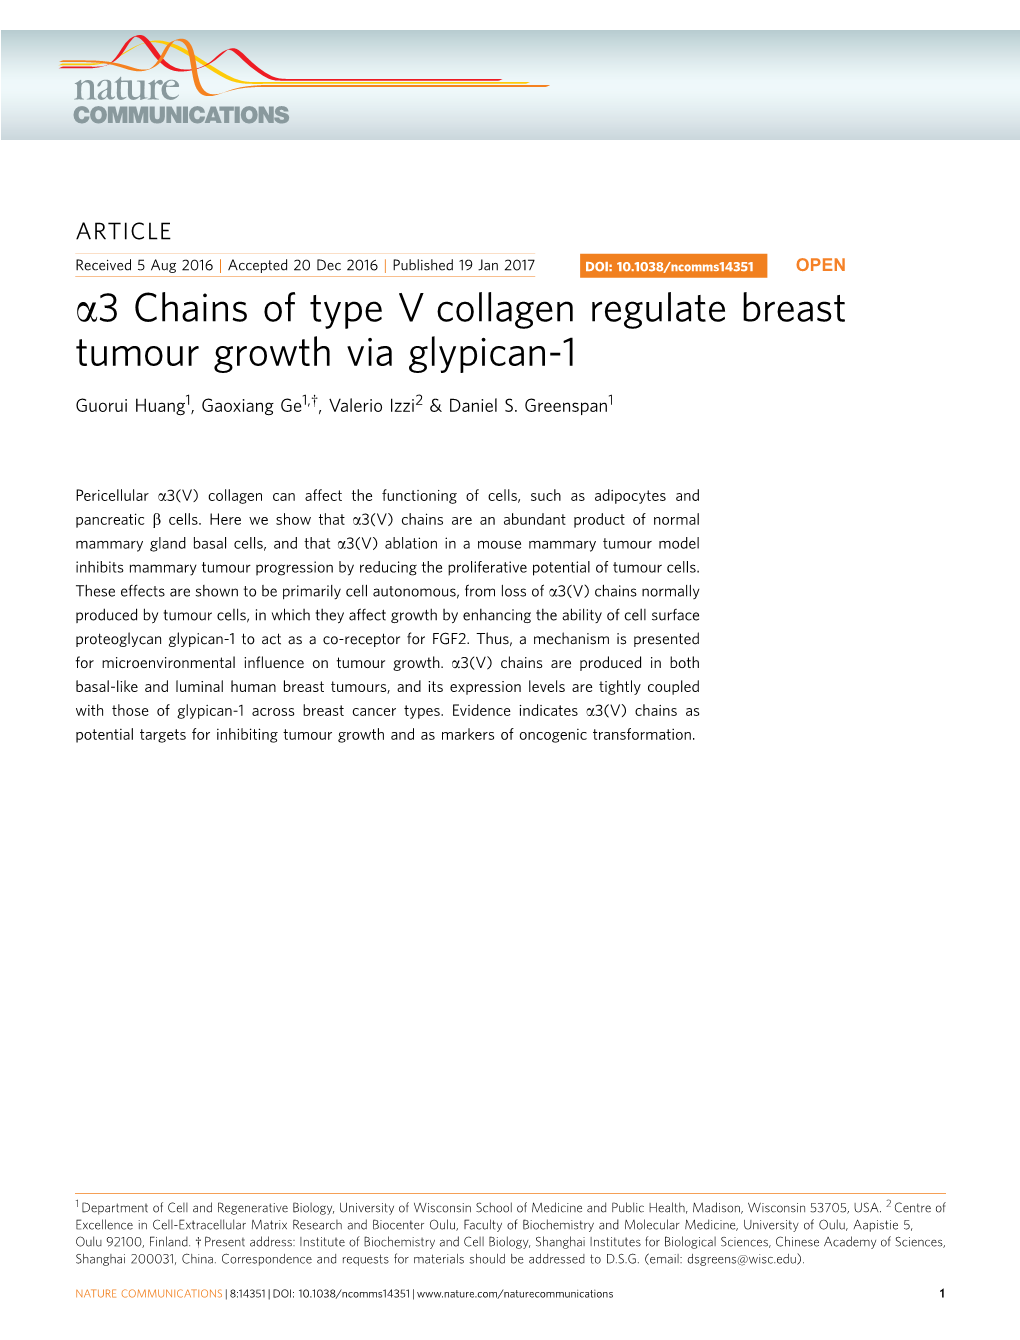 3 Chains of Type V Collagen Regulate Breast Tumour Growth Via Glypican-1